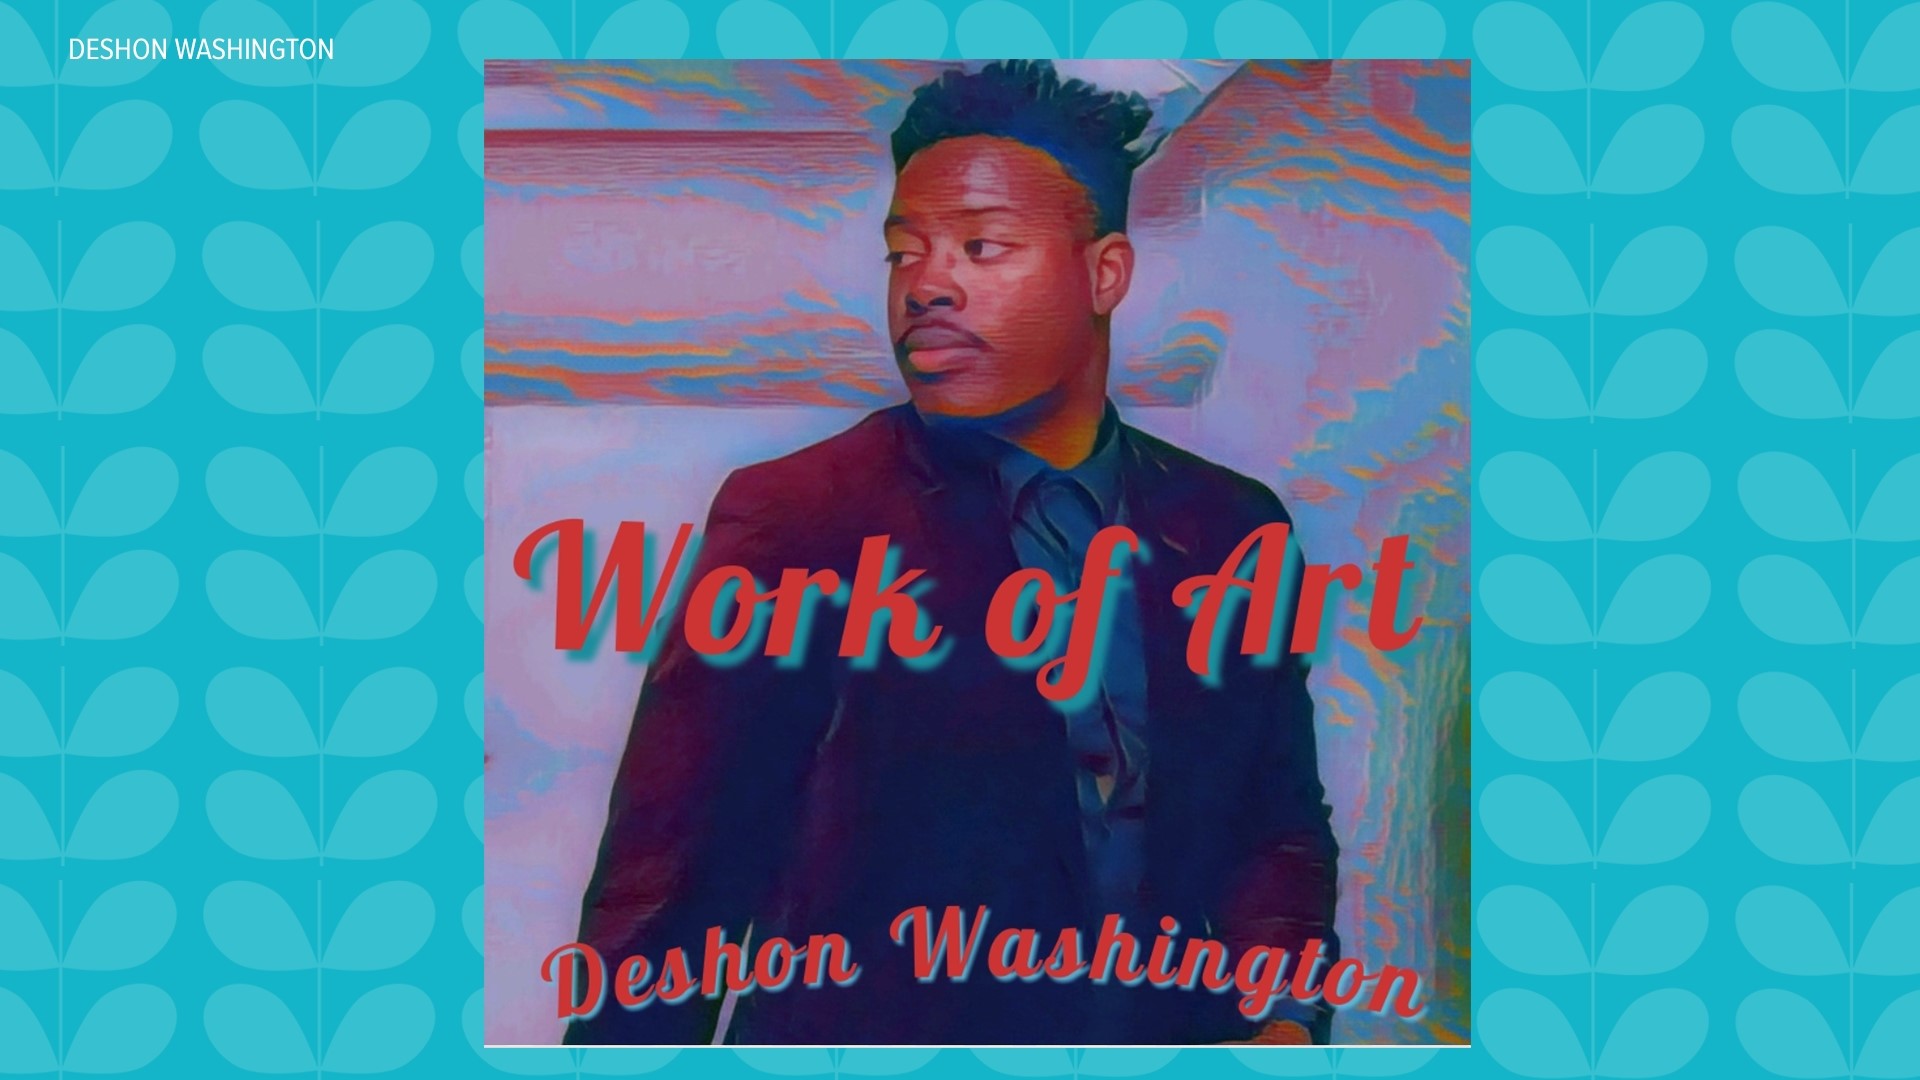 Local Artist Deshon Washington new single, "Work of Art" drops on May first. You can also see him perform live at the House of Hip Hop on April 20th.